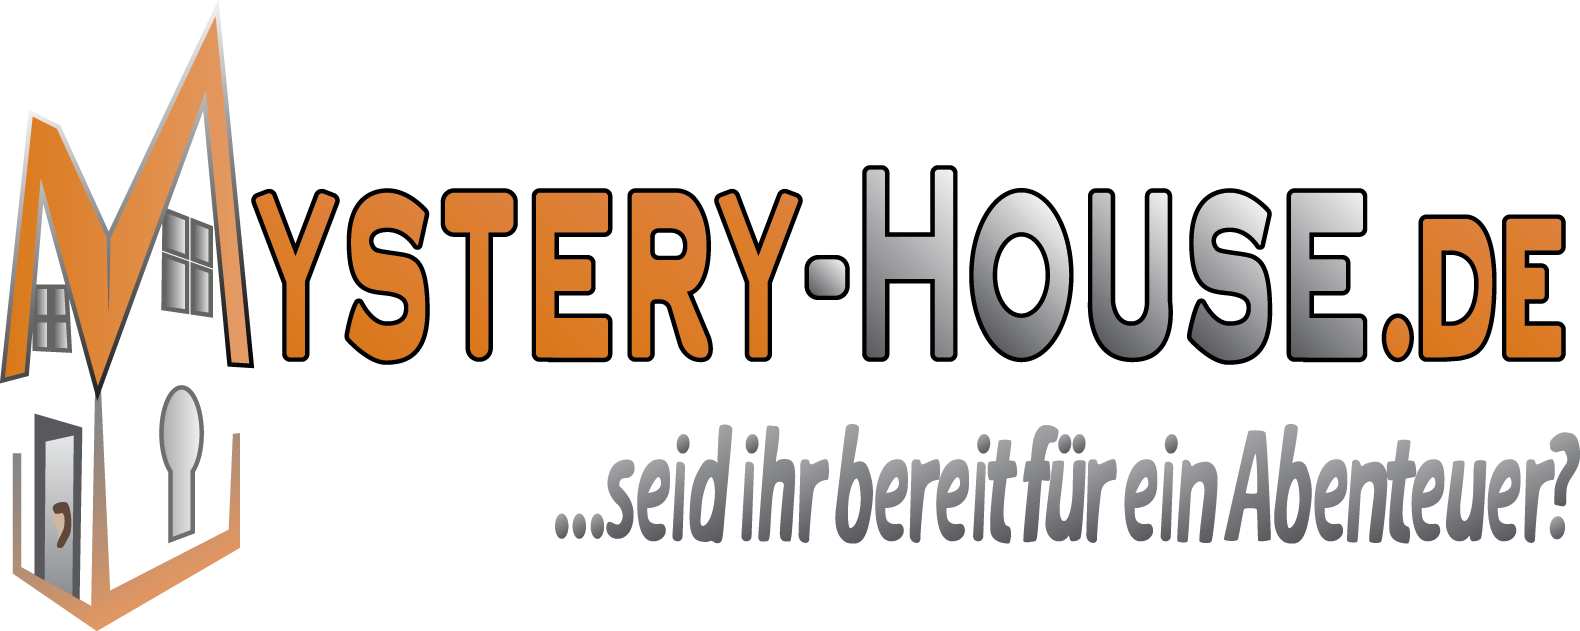 Mystery-House-Logo-PNG.png